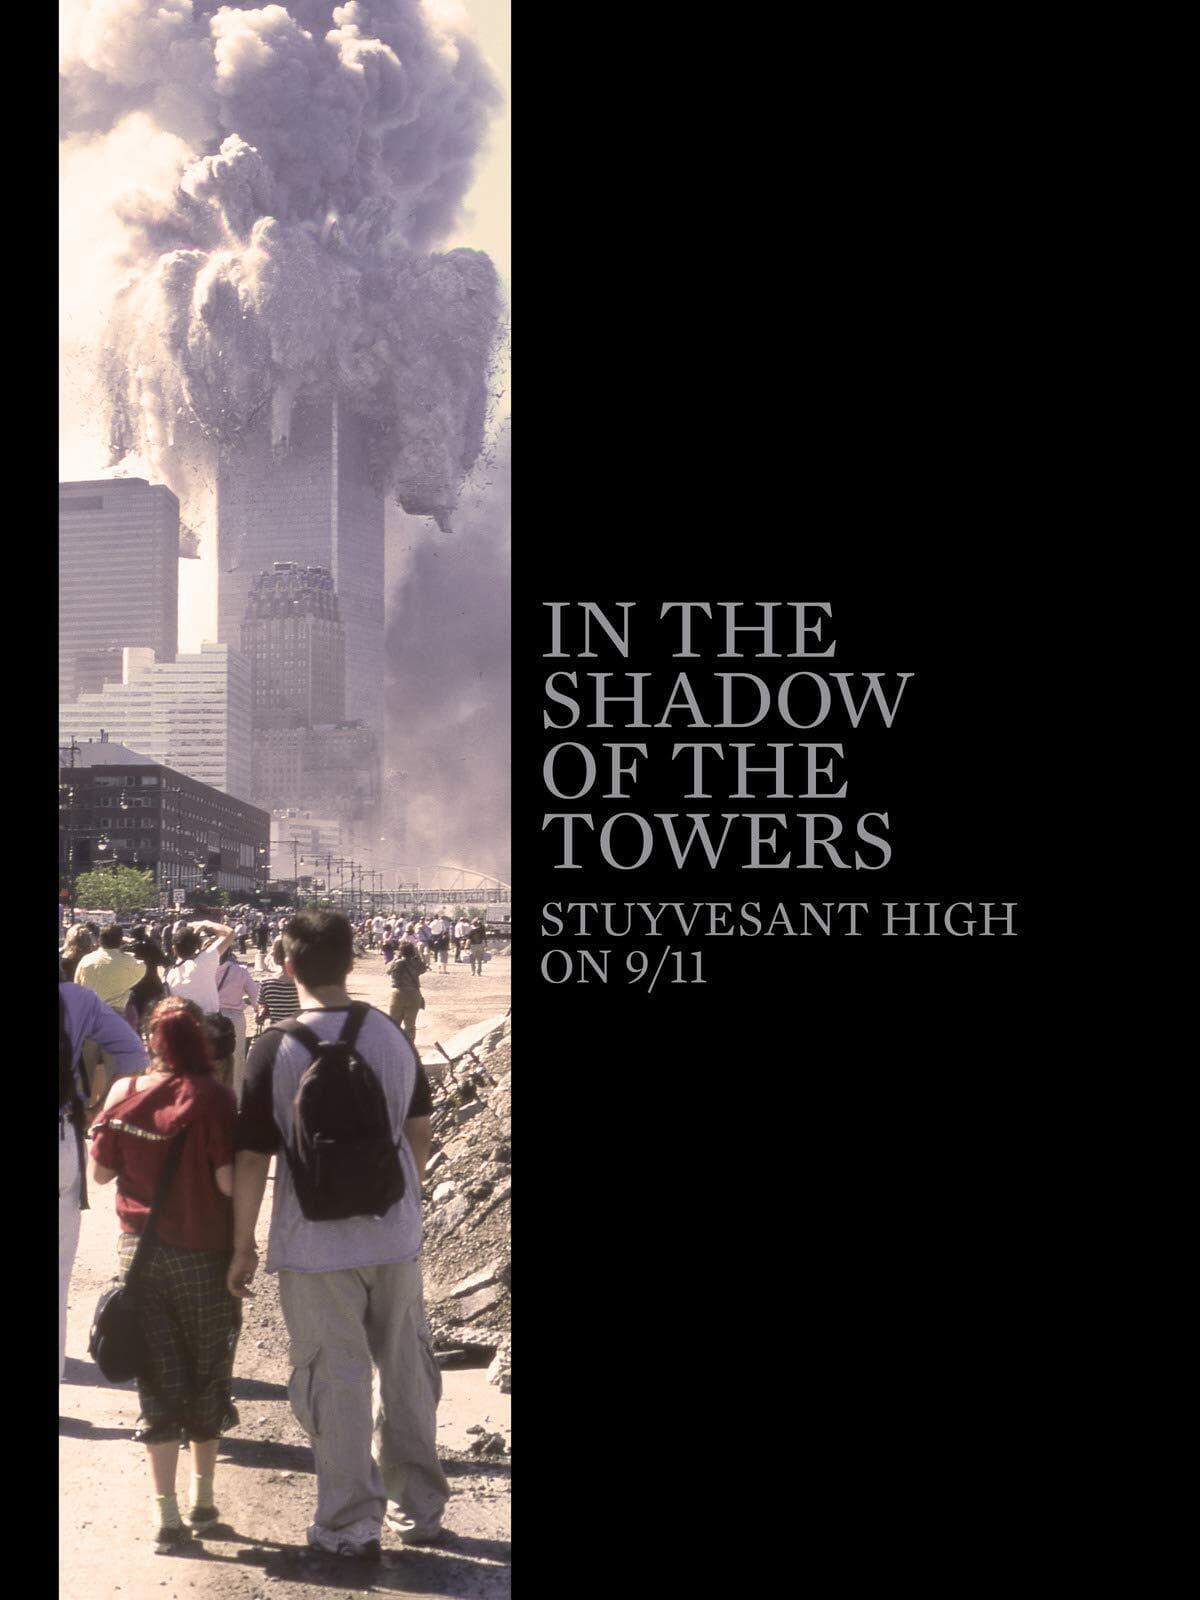 In the Shadow of the Towers: Stuyvesant High on 9/11 poster